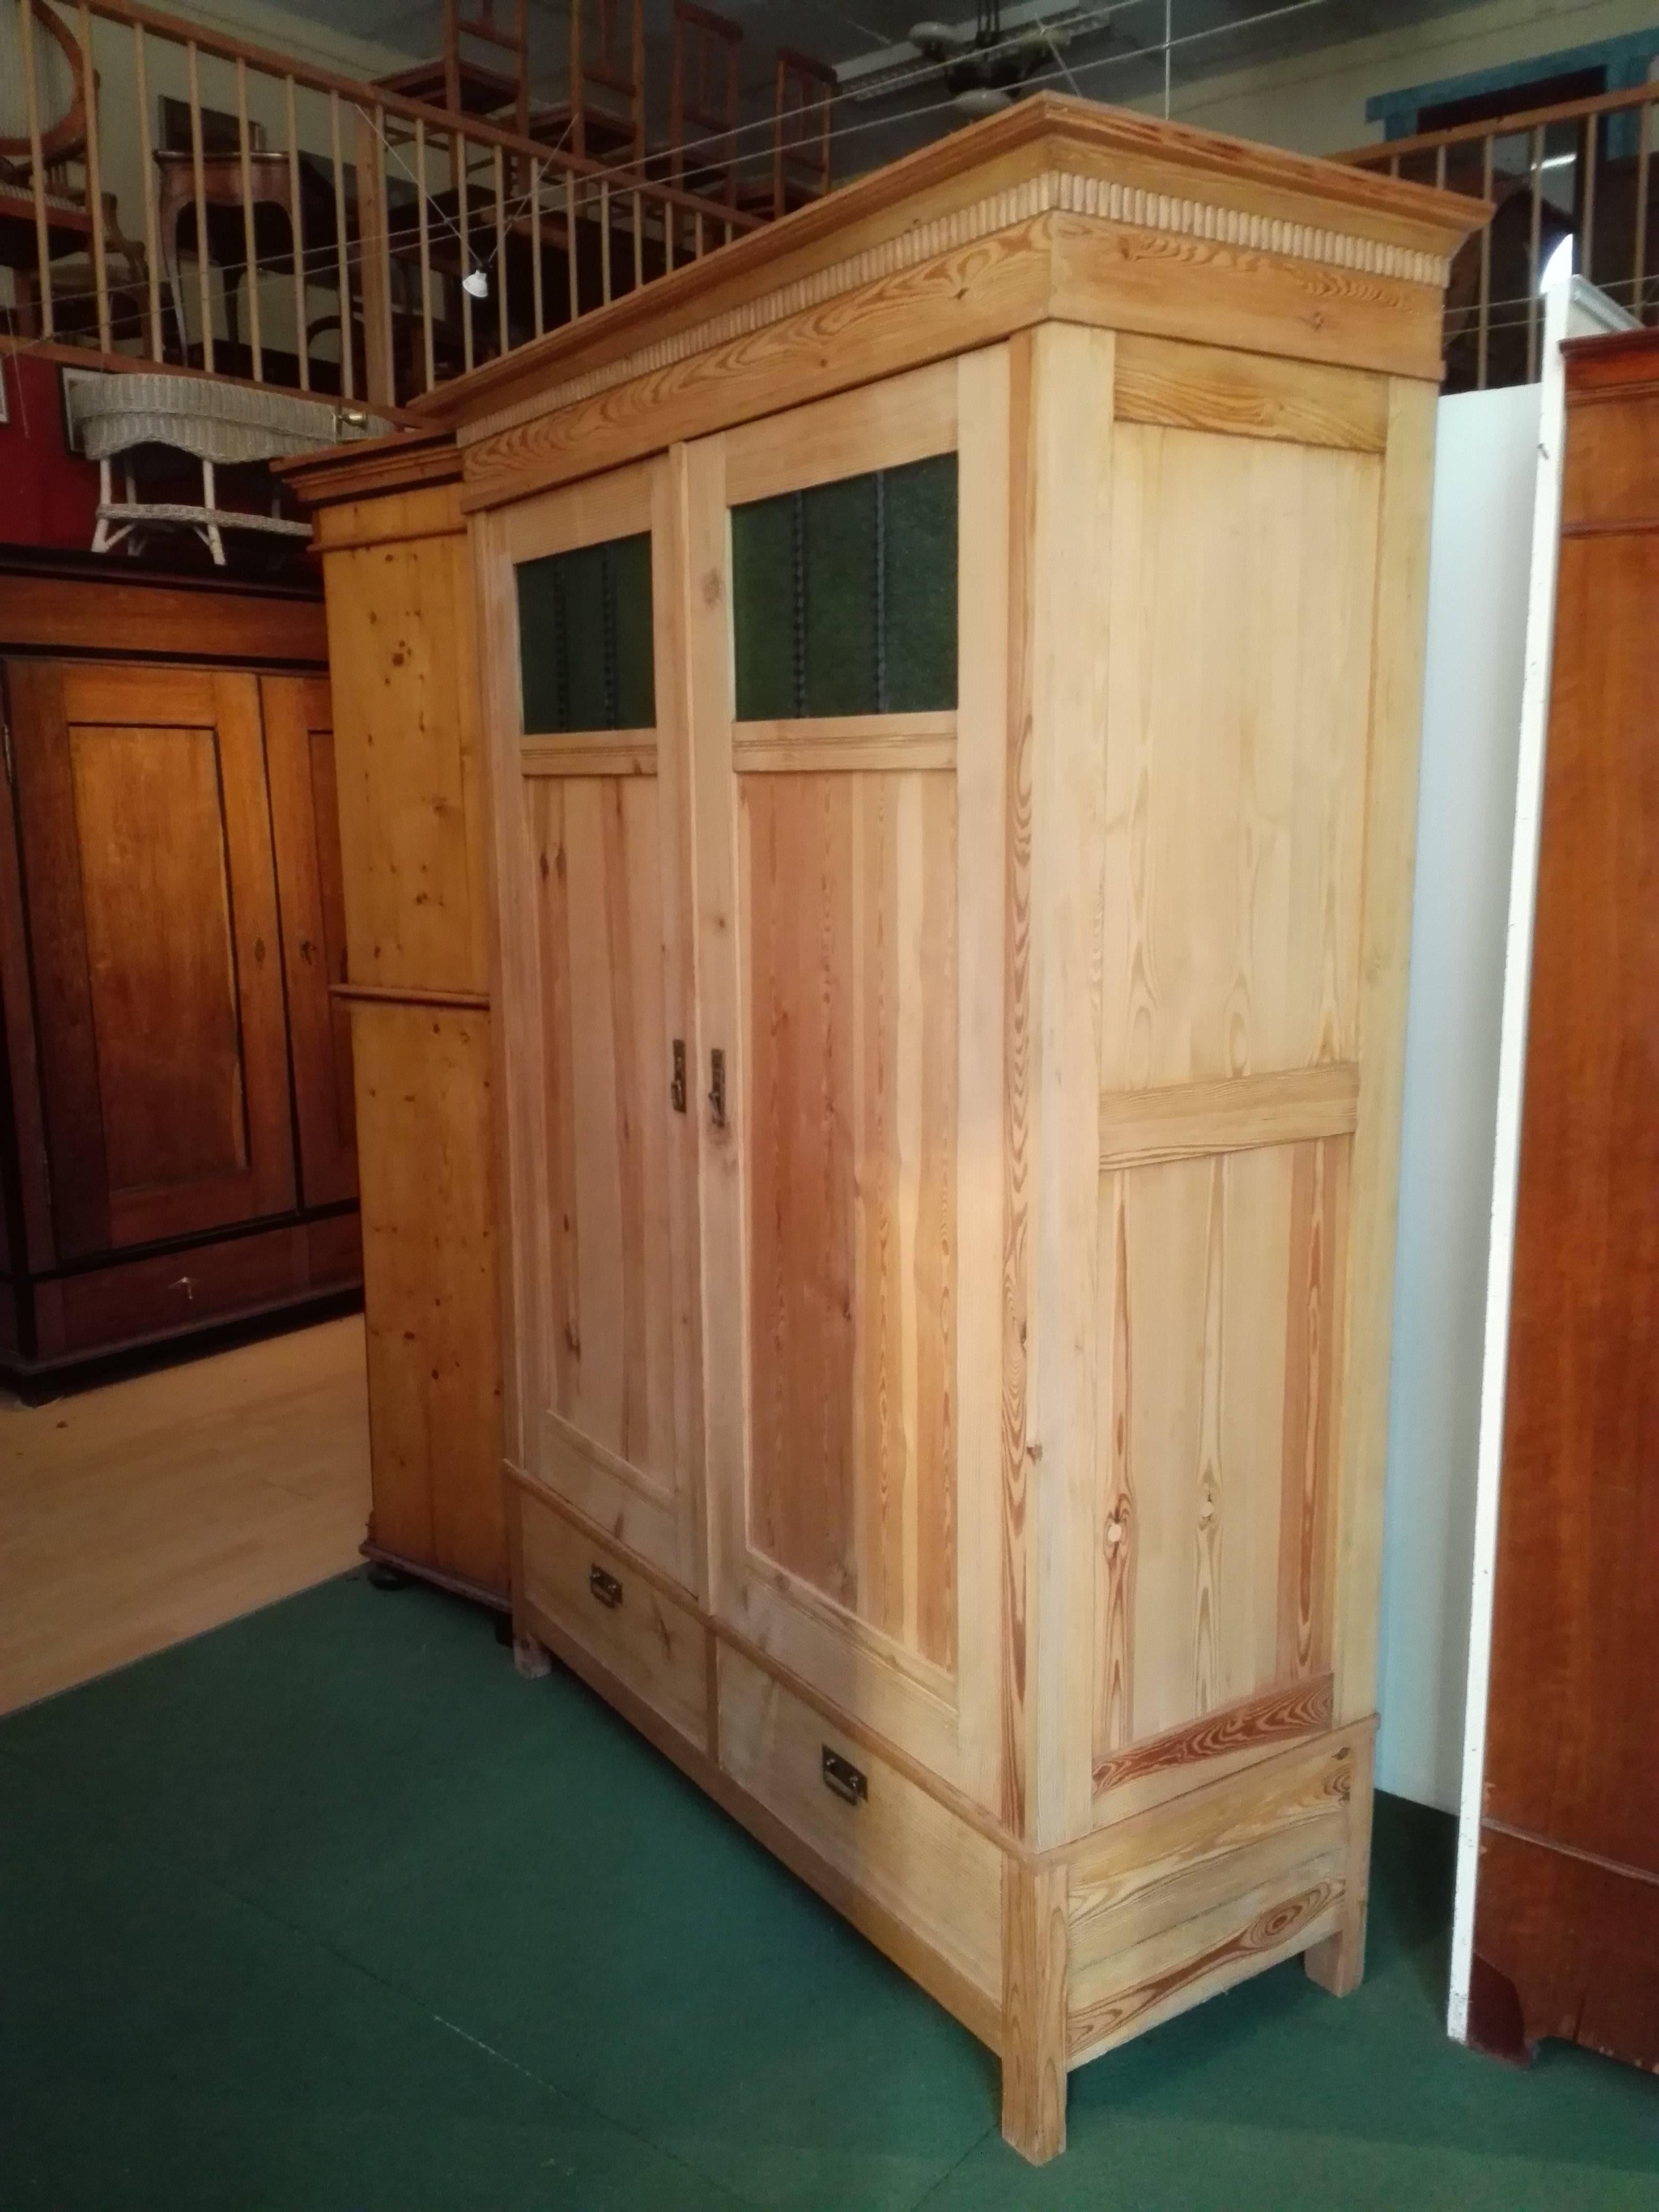 This stylistically Classic Art Nouveau wardrobe is fully collapsible in frame and filling worked! He is fully completely, sensitive and biologically restored and wears a pure shellac, oilwax patina! This is Restauration in perfection!